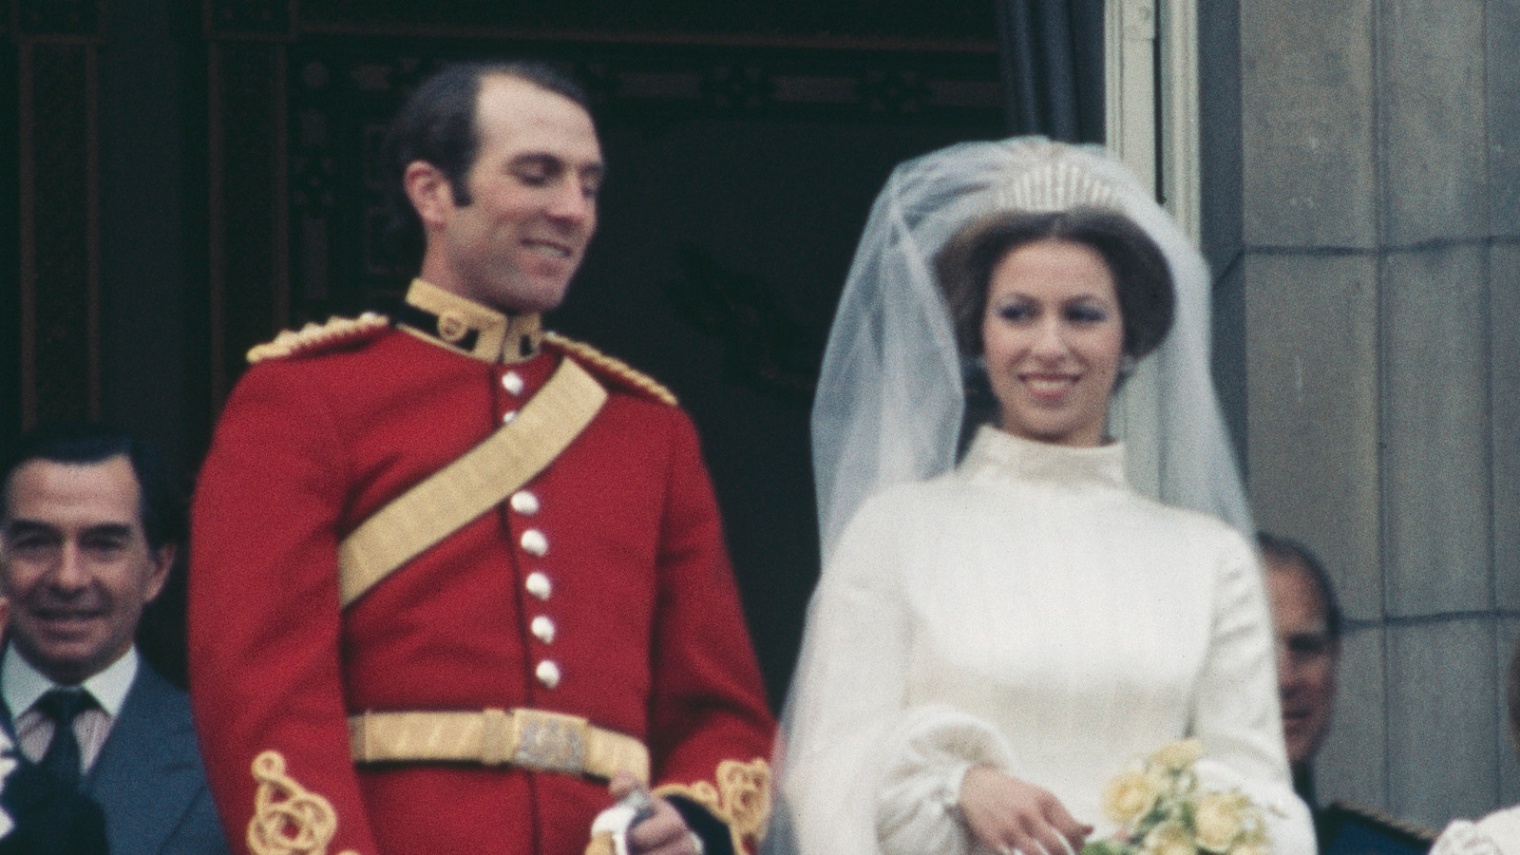 Check Out the Biggest Scandals that the Royal Family Was Involved In